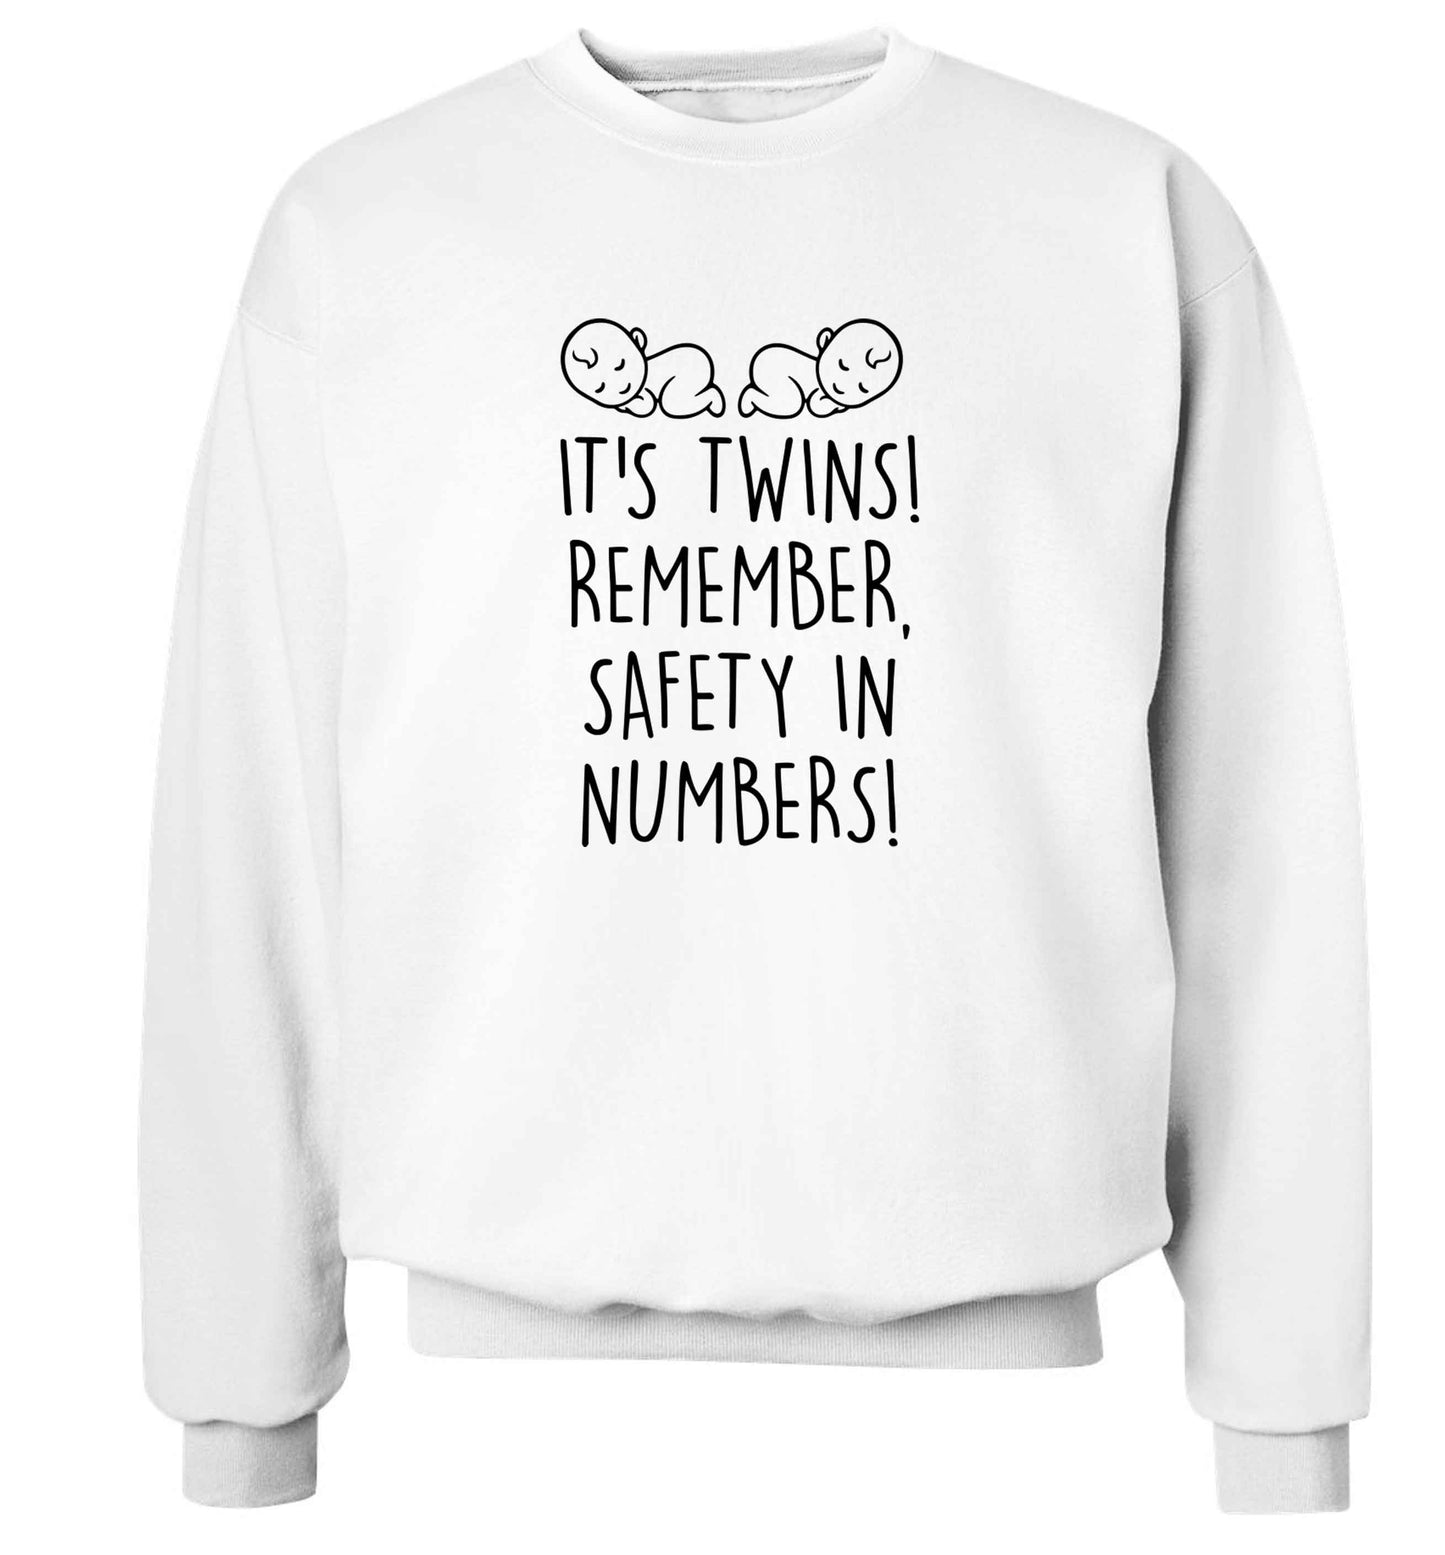 It's twins! Remember safety in numbers! adult's unisex white sweater 2XL